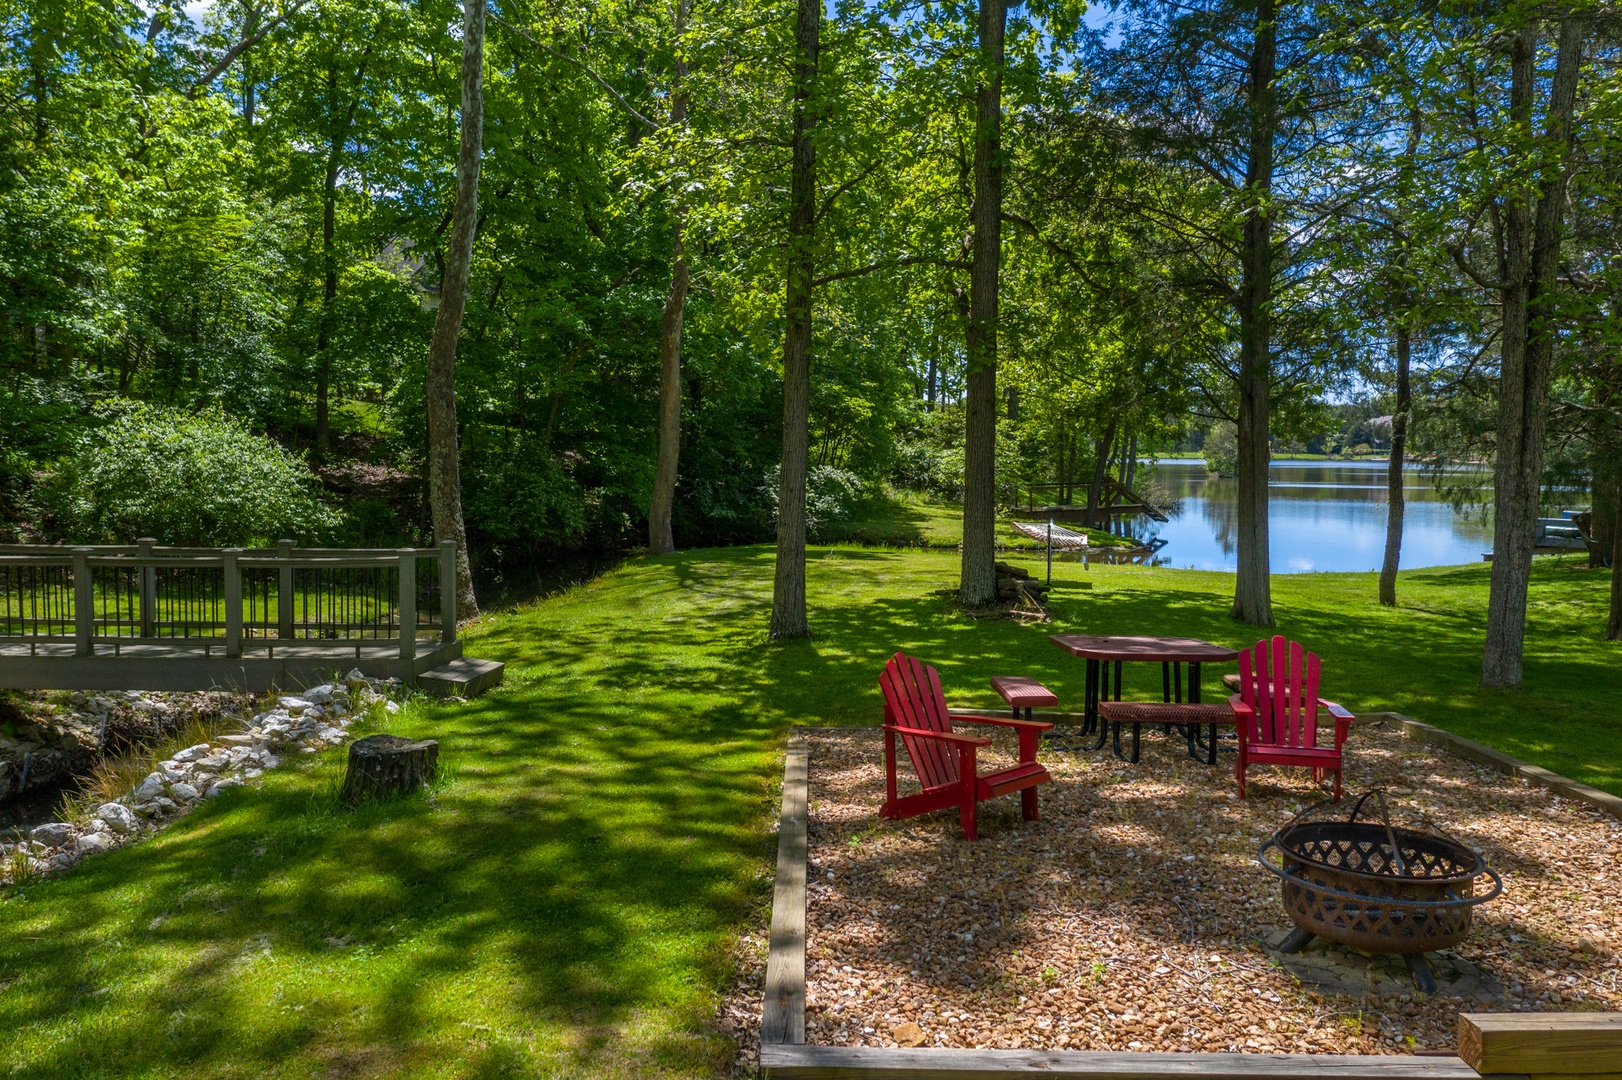 Enjoy a shaded lunch at the picnic table, or an evening around the fire pit